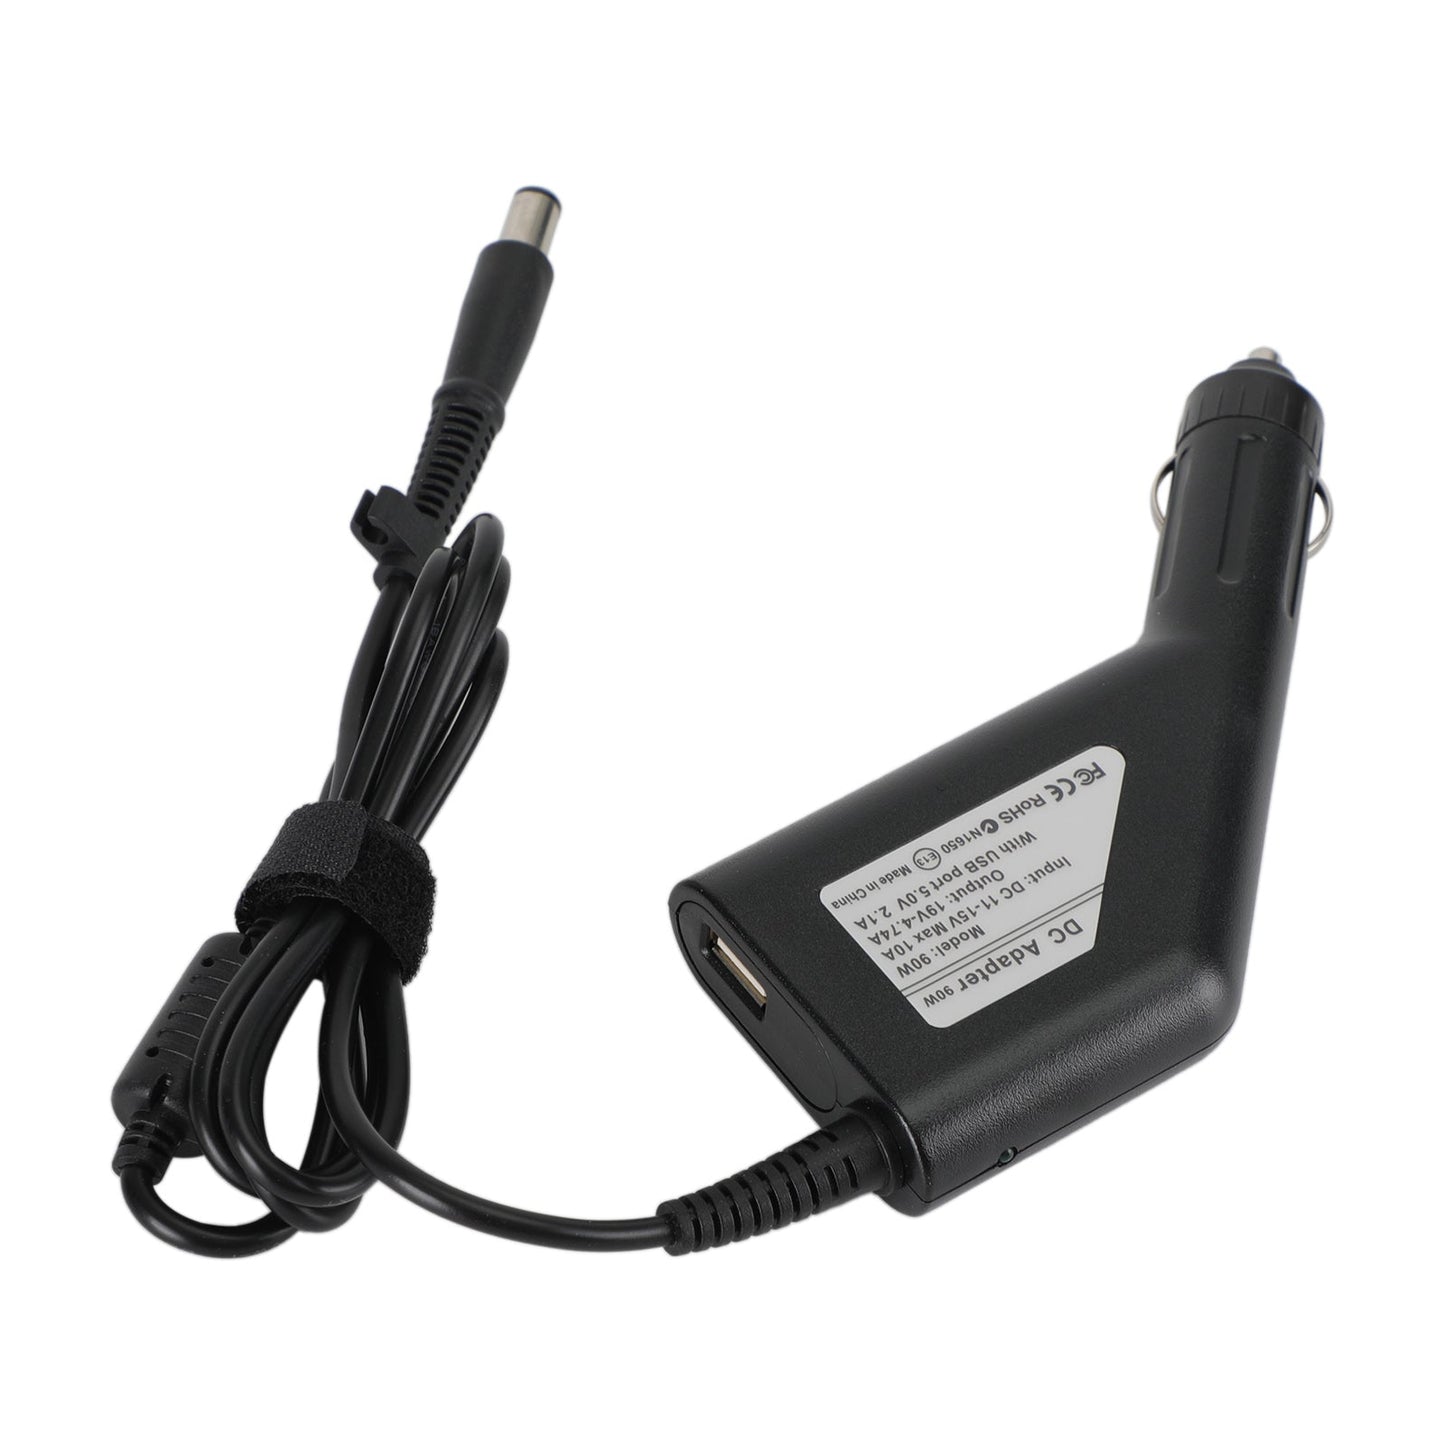 19V 4.74A laptop computers Car Charger Dc Power Adapter for HP Laptop QC3.0 USB